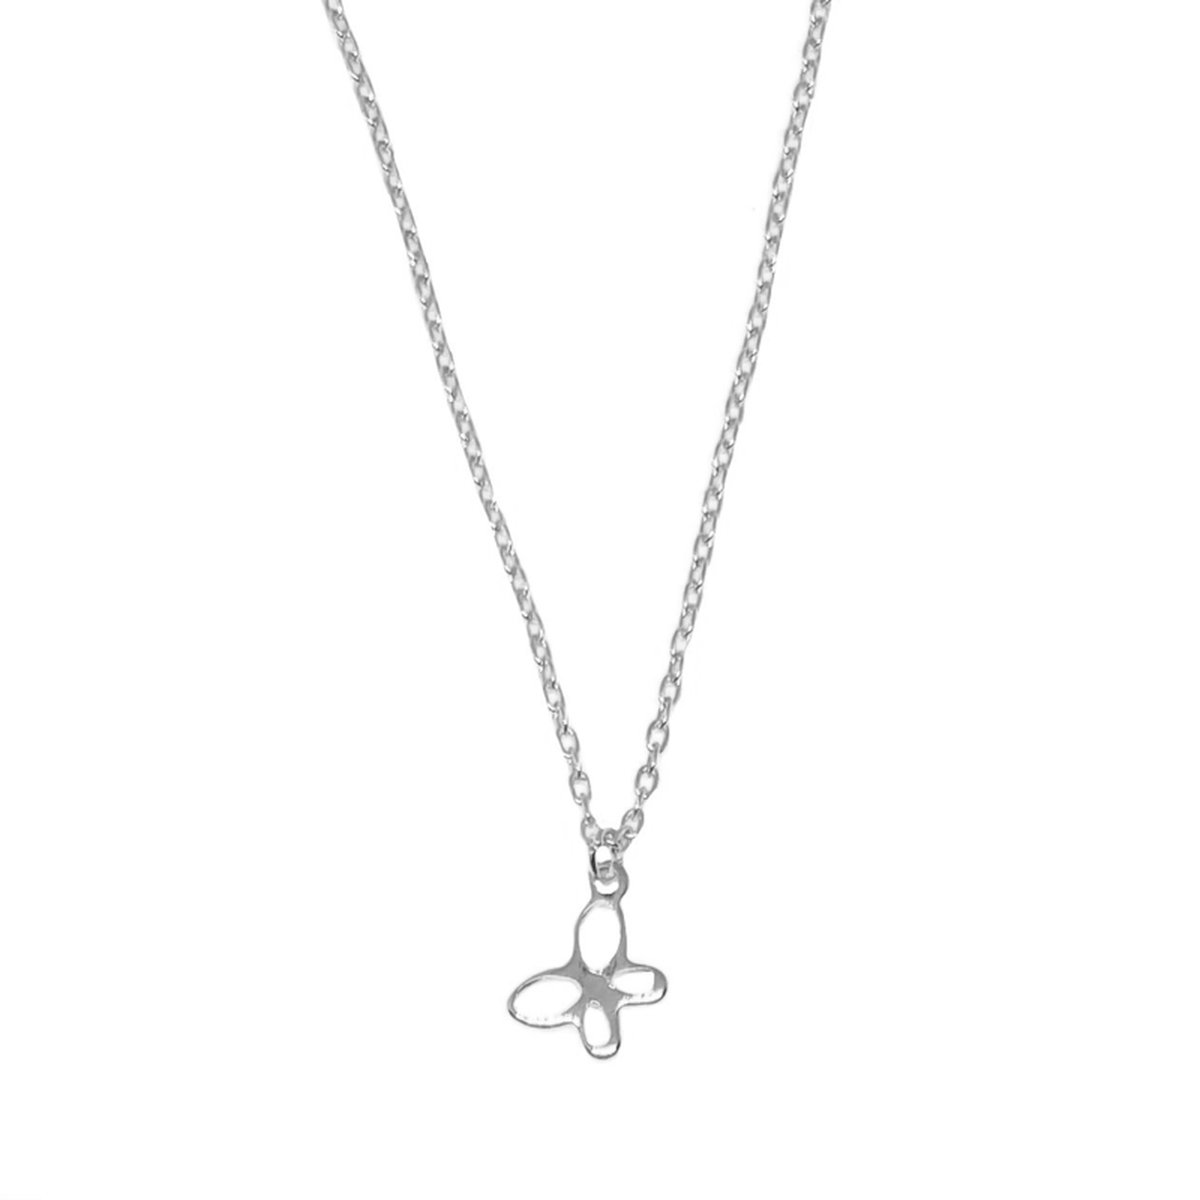 Butterfly necklace - silver